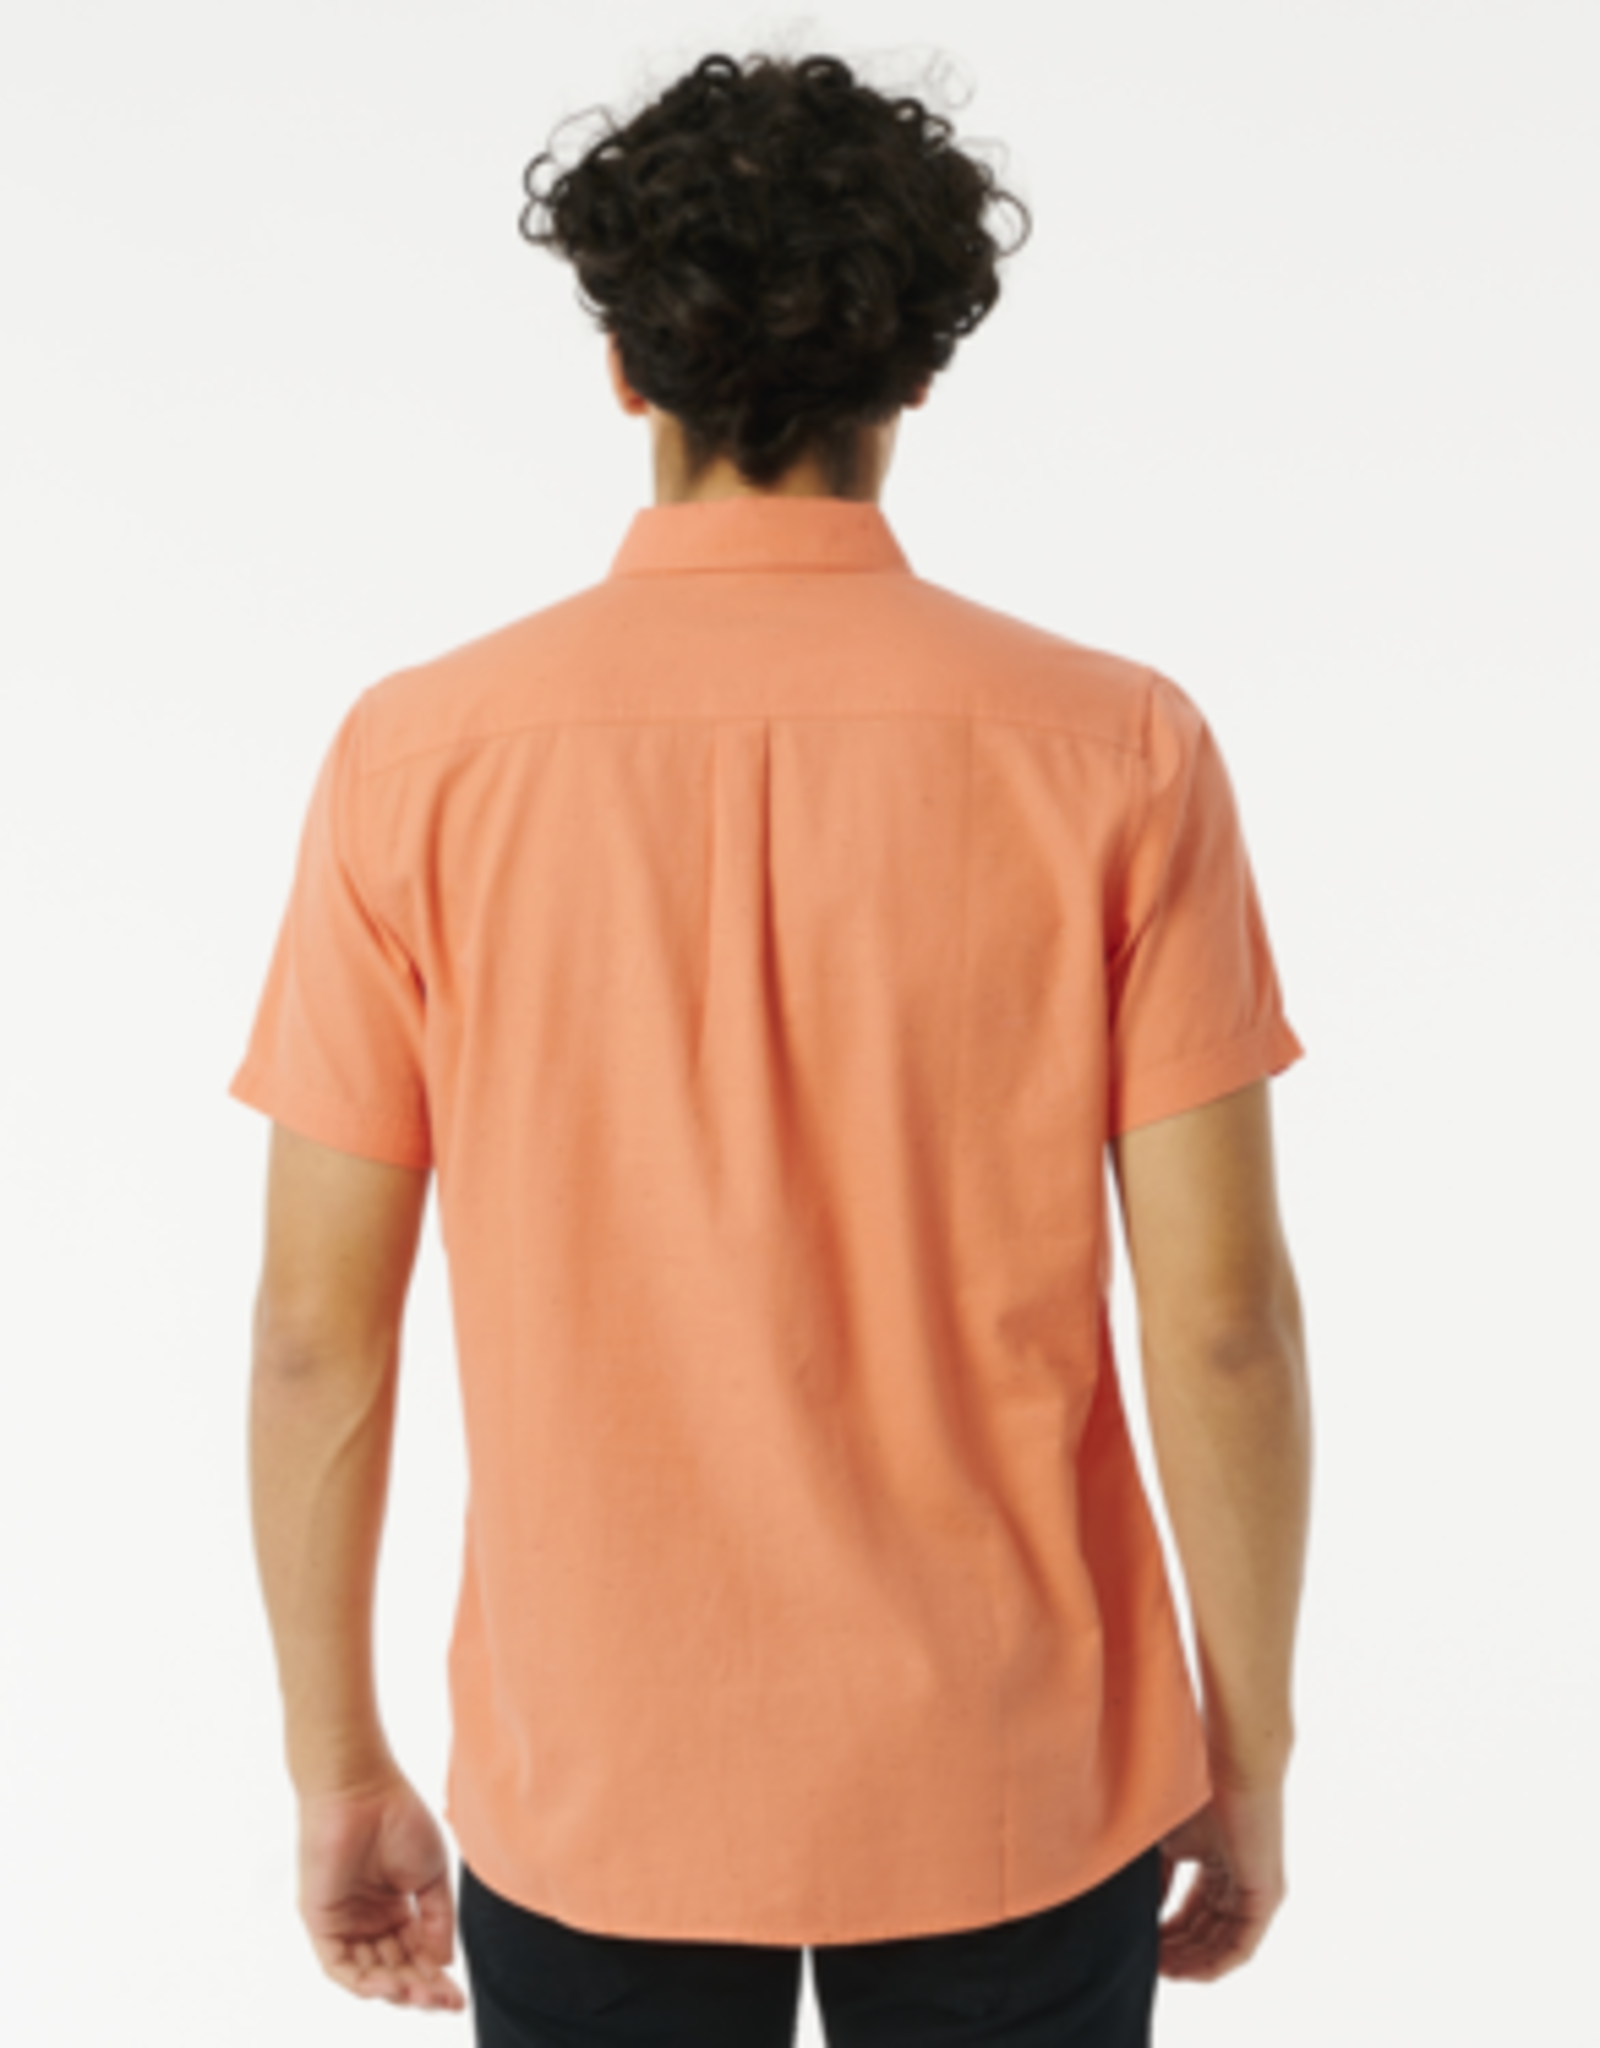 RIPCURL OURTIME S/S SHIRT